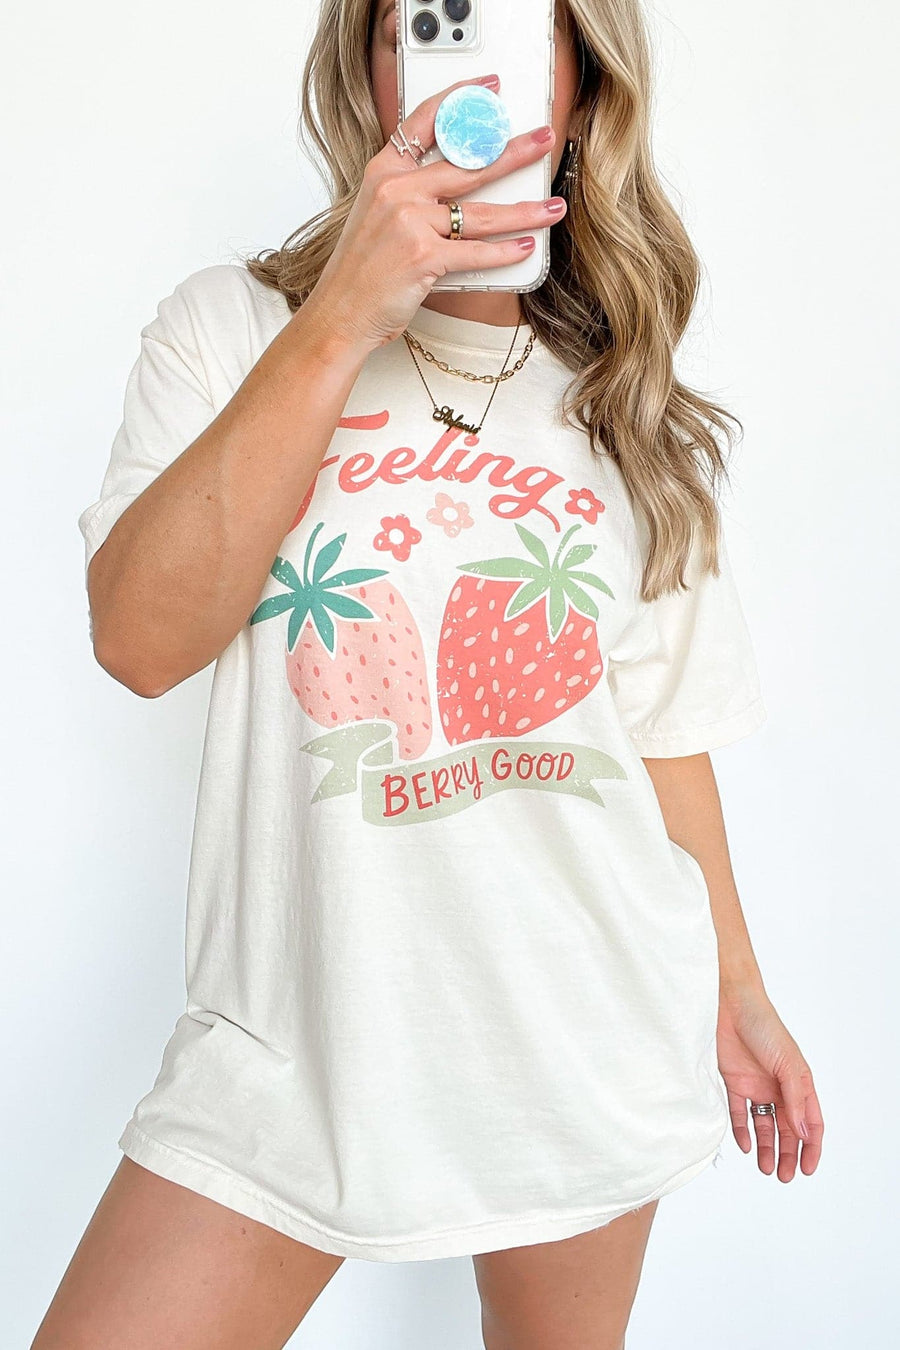  Feeling Berry Good Vintage Relaxed Graphic Tee - BACK IN STOCK - Madison and Mallory